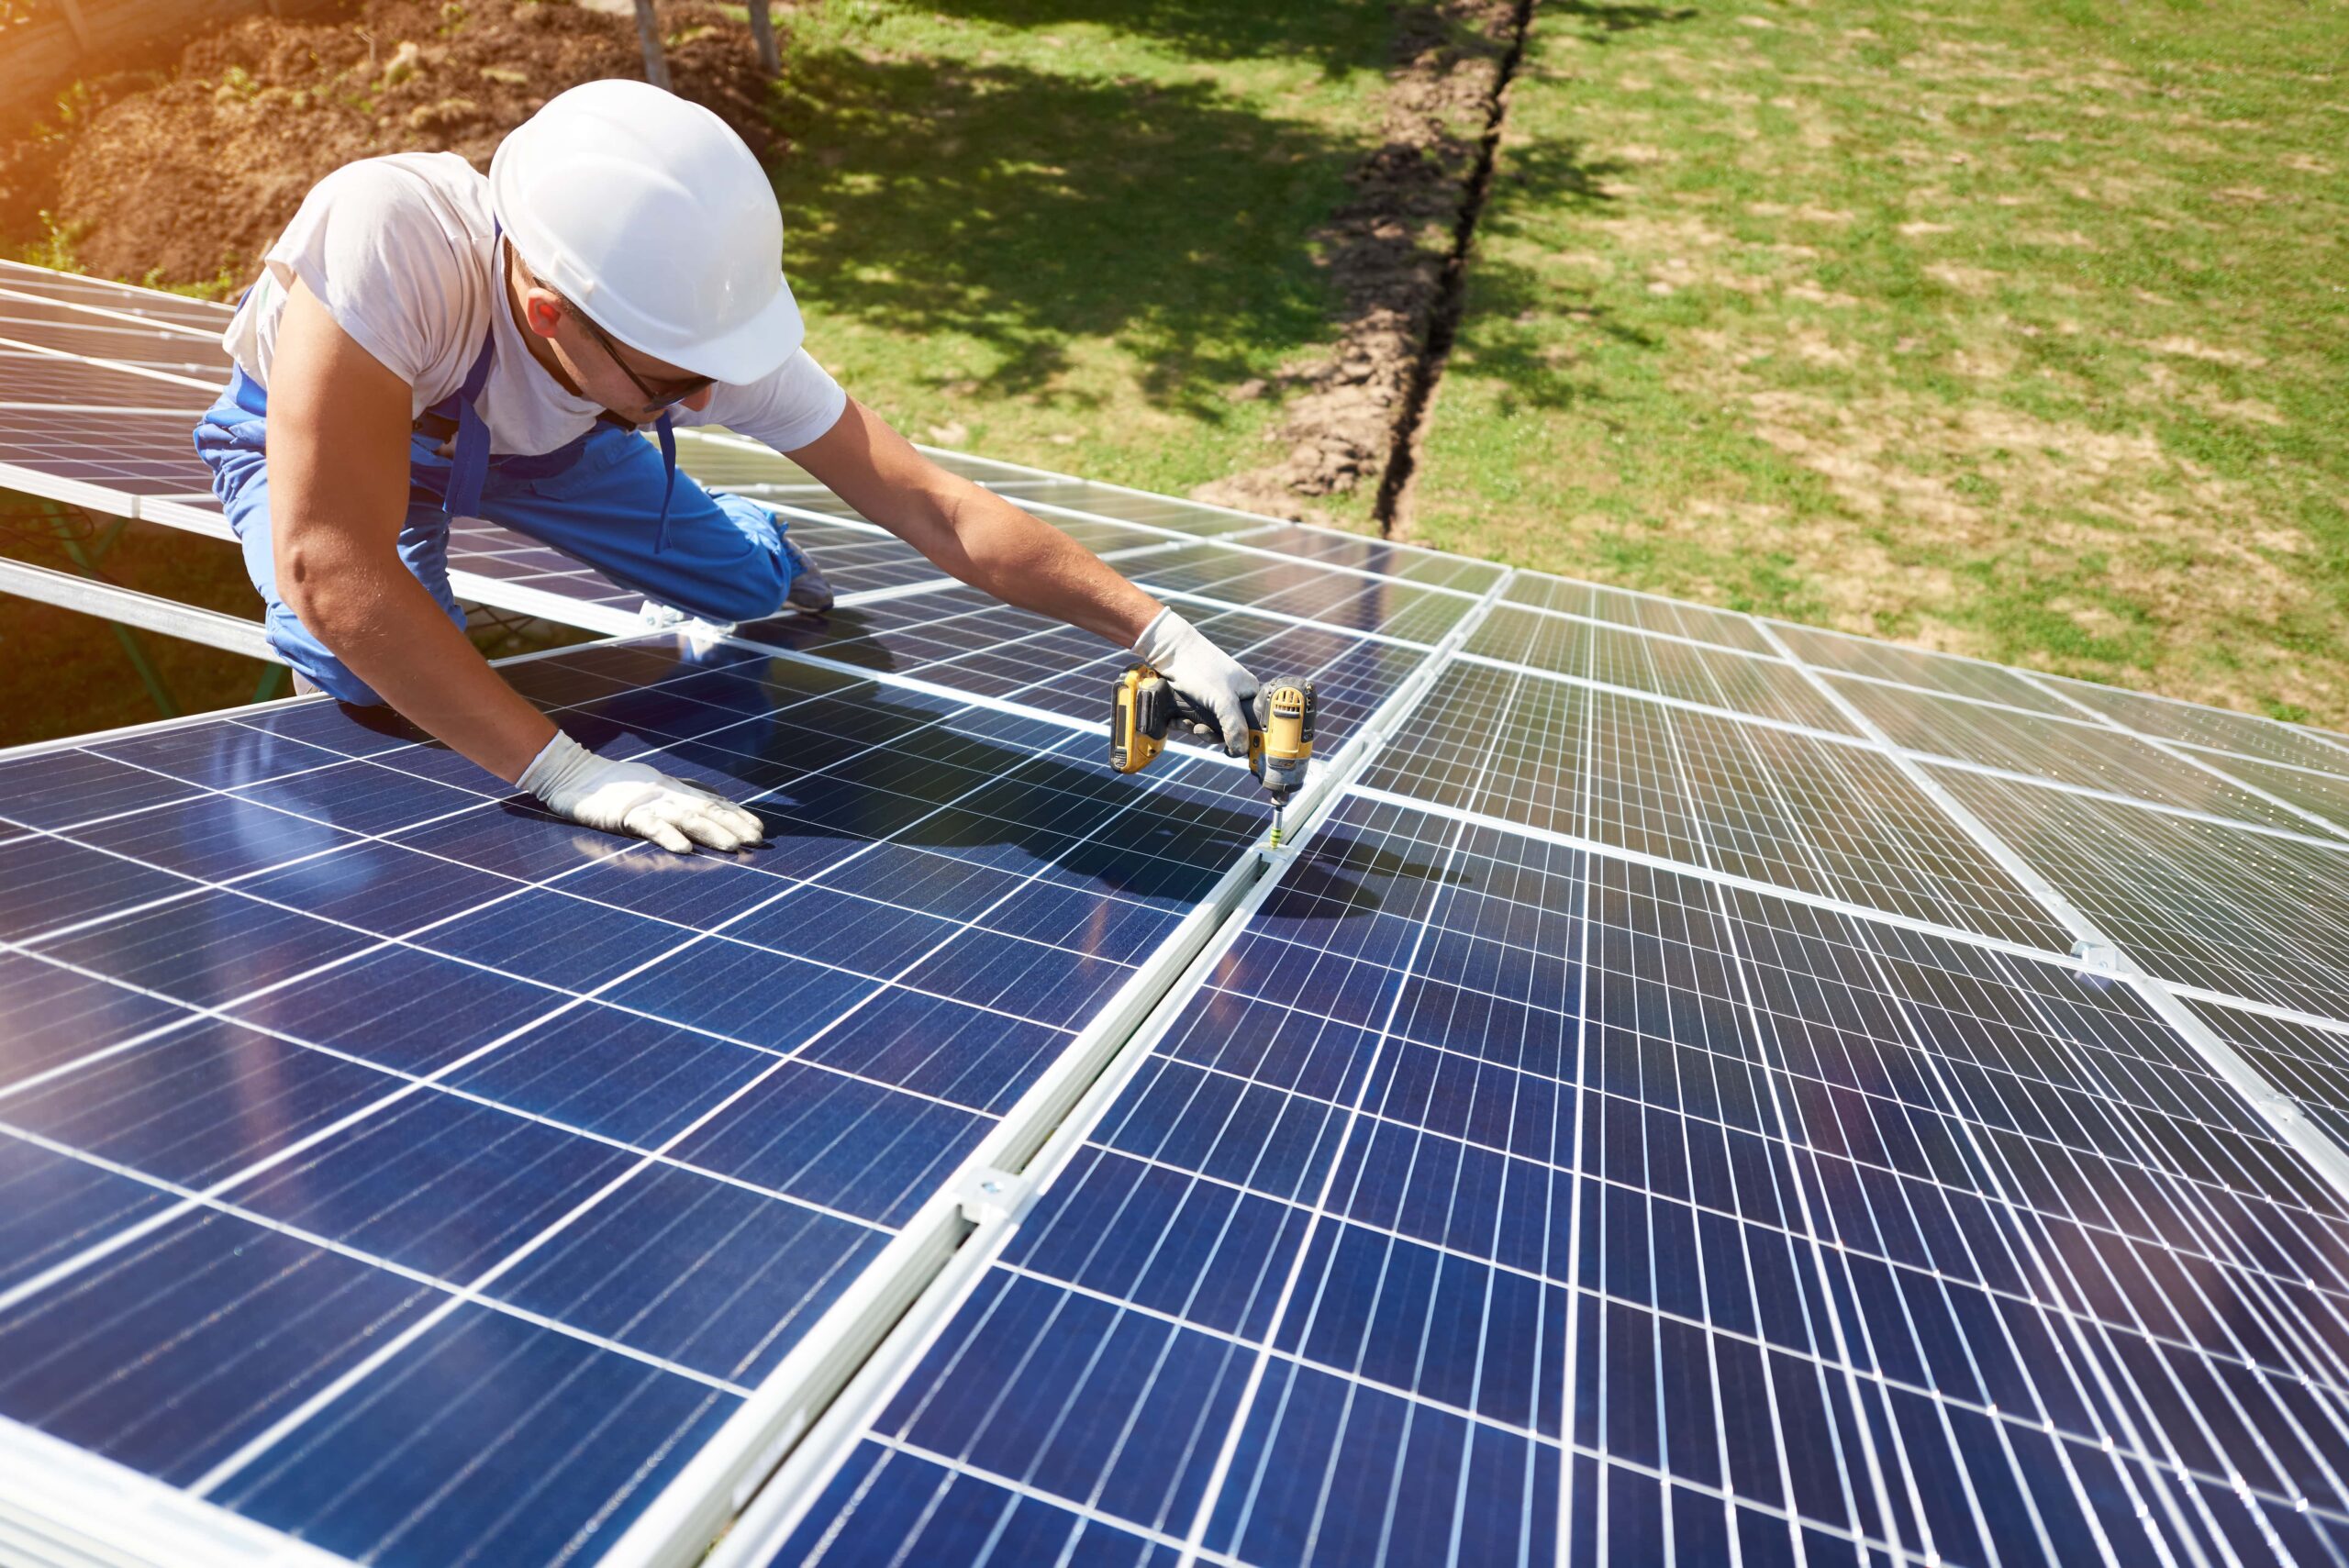 HOW SOLAR PANELS MAY SAVE YOU MONEY?